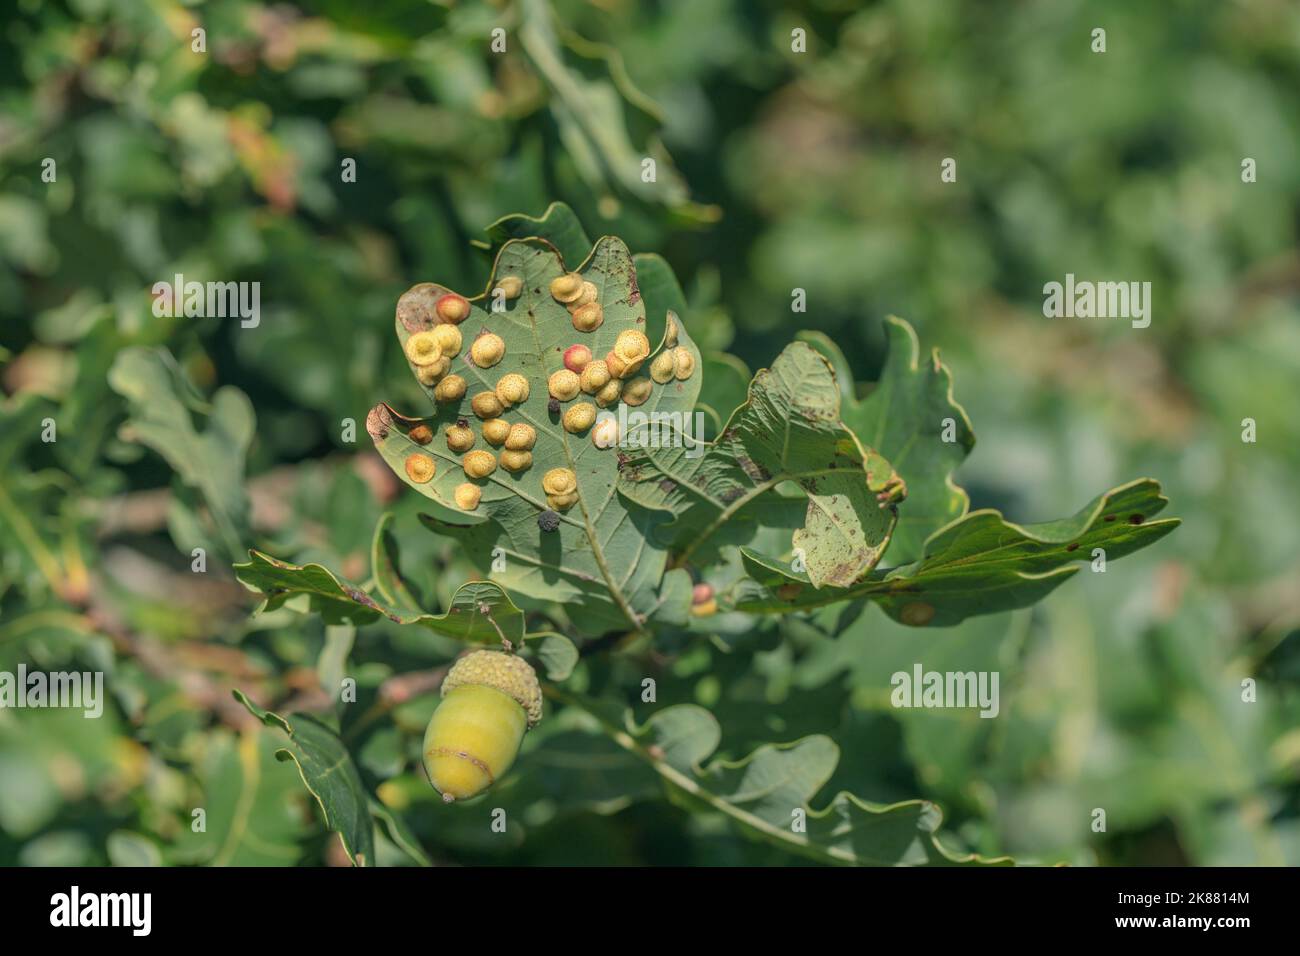 Gall wasps (Neuroterus quercusbaccarum) on the underside of an oak leaf. Stock Photo